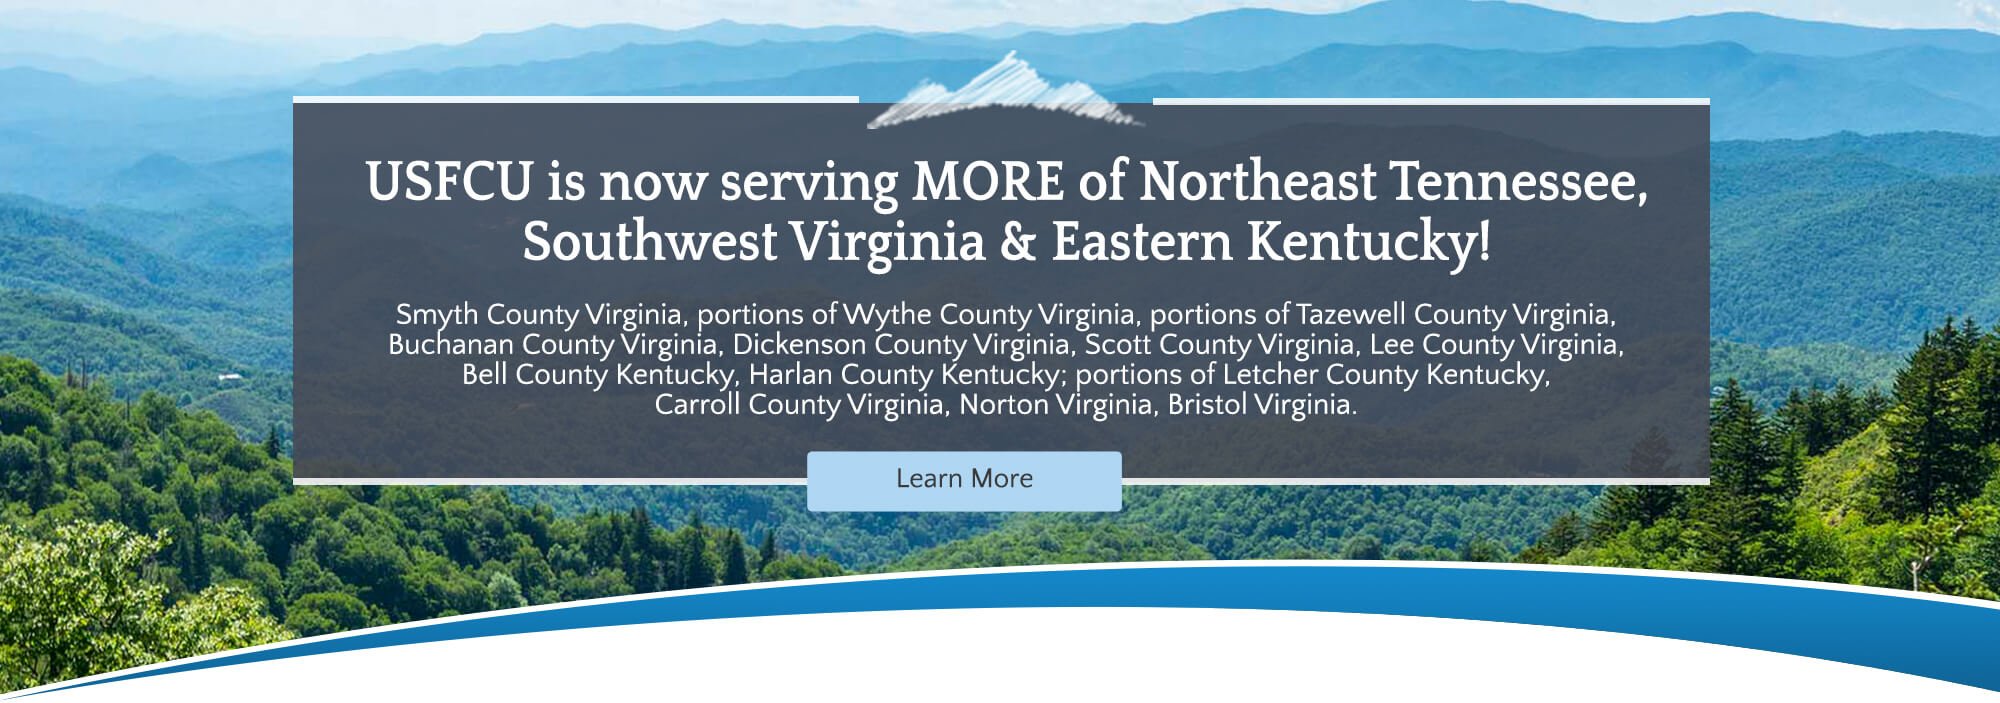 USFCU is now serving more of Northeast Tennessee, Southwest Virginia and Eastern Kentucky! Smyth County Virginia, portions of Wythe County Virginia, portions of Tazewell County Viginia, Buchanan County Virginia Dickenson County Virginia, Scott County Virginia, Lee County Virginia, Bell County Kentucky, Harlan County Kentucky; portions of Letcher County Kentucky, Carroll County Virginia, Norton Virginia, Bristol Virginia. Learn More